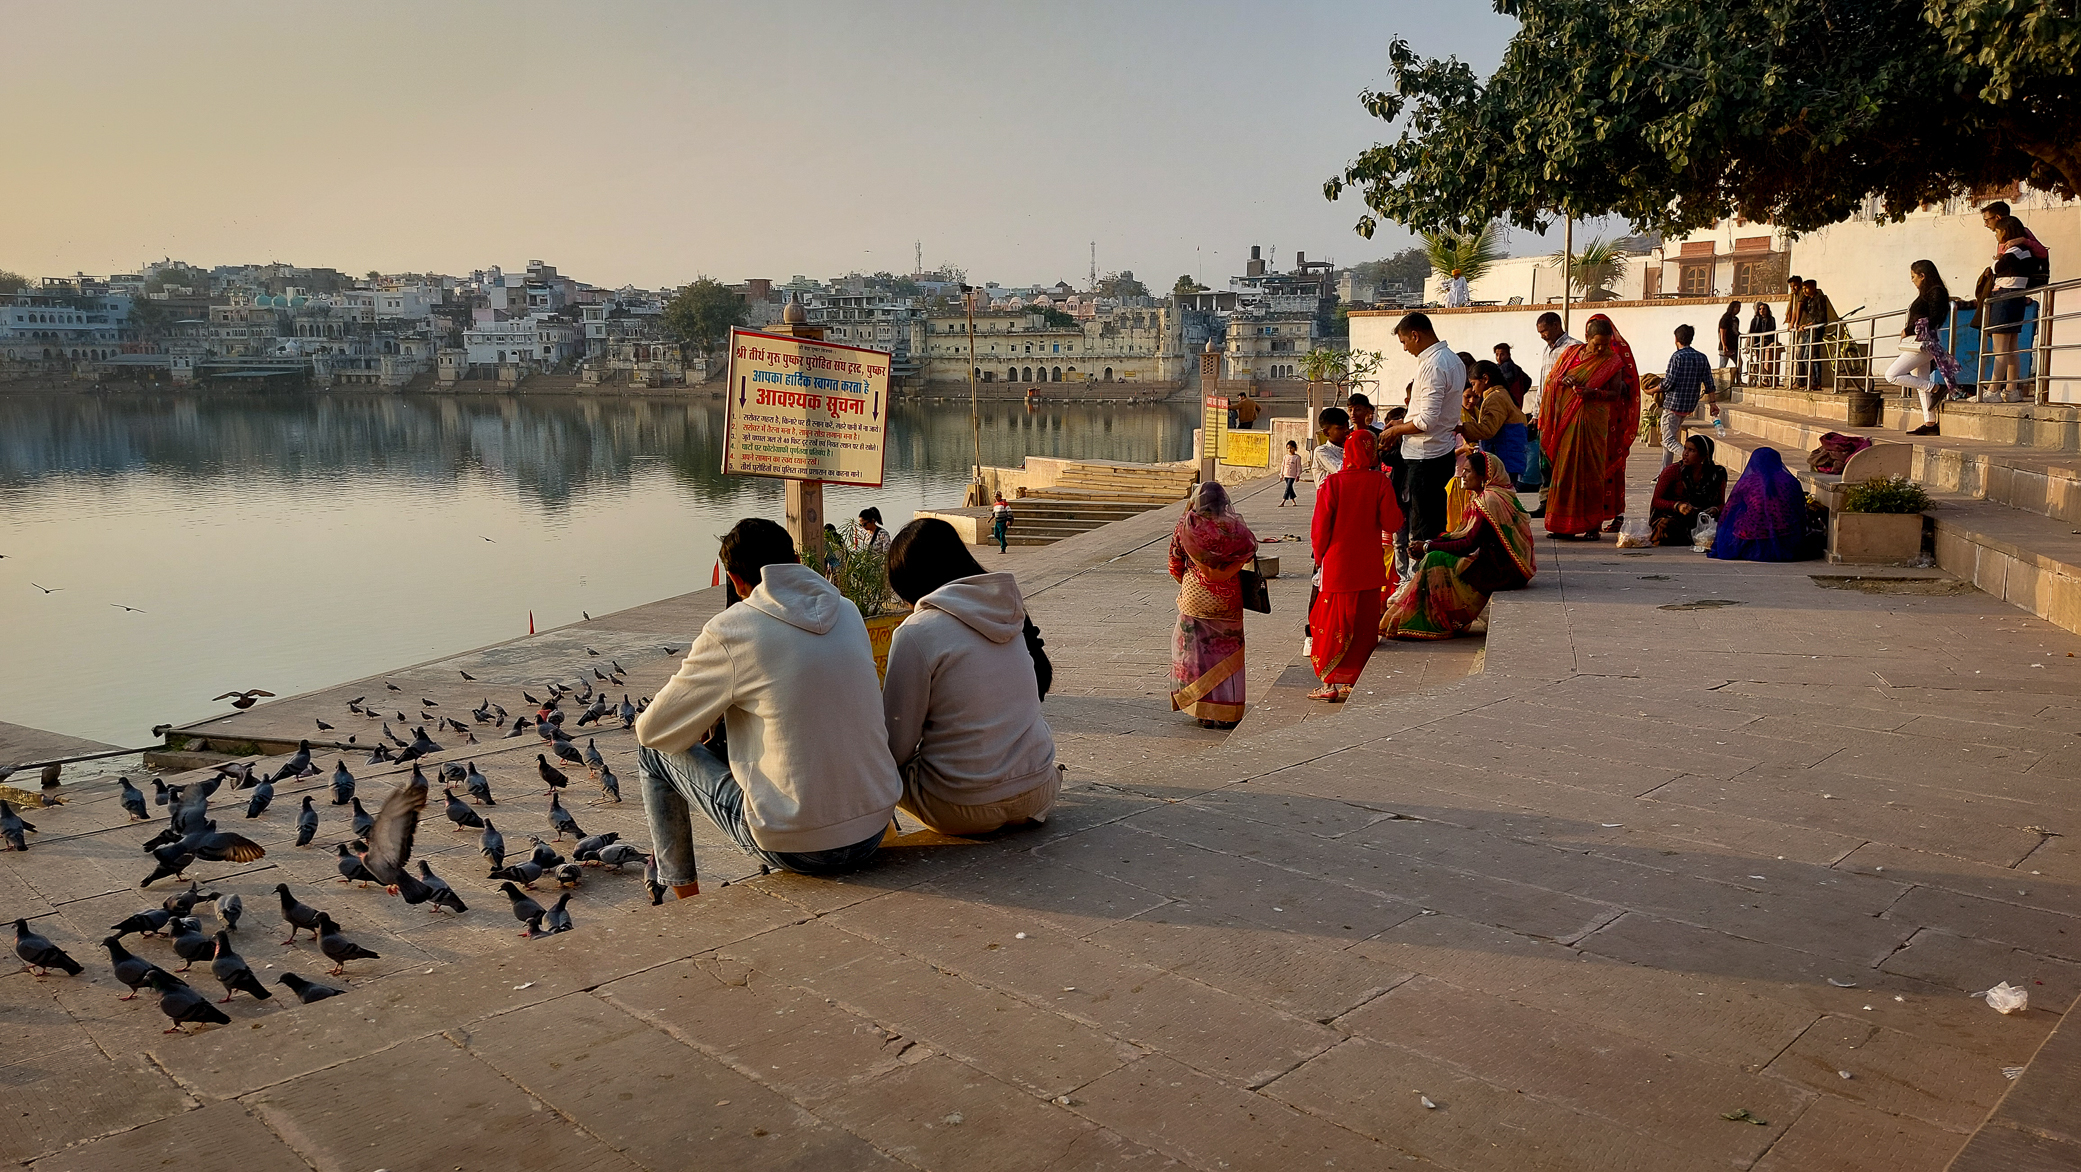 <span  class="uc_style_uc_tiles_grid_image_elementor_uc_items_attribute_title" style="color:#ffffff;">Pushkar Lake at sunset</span>